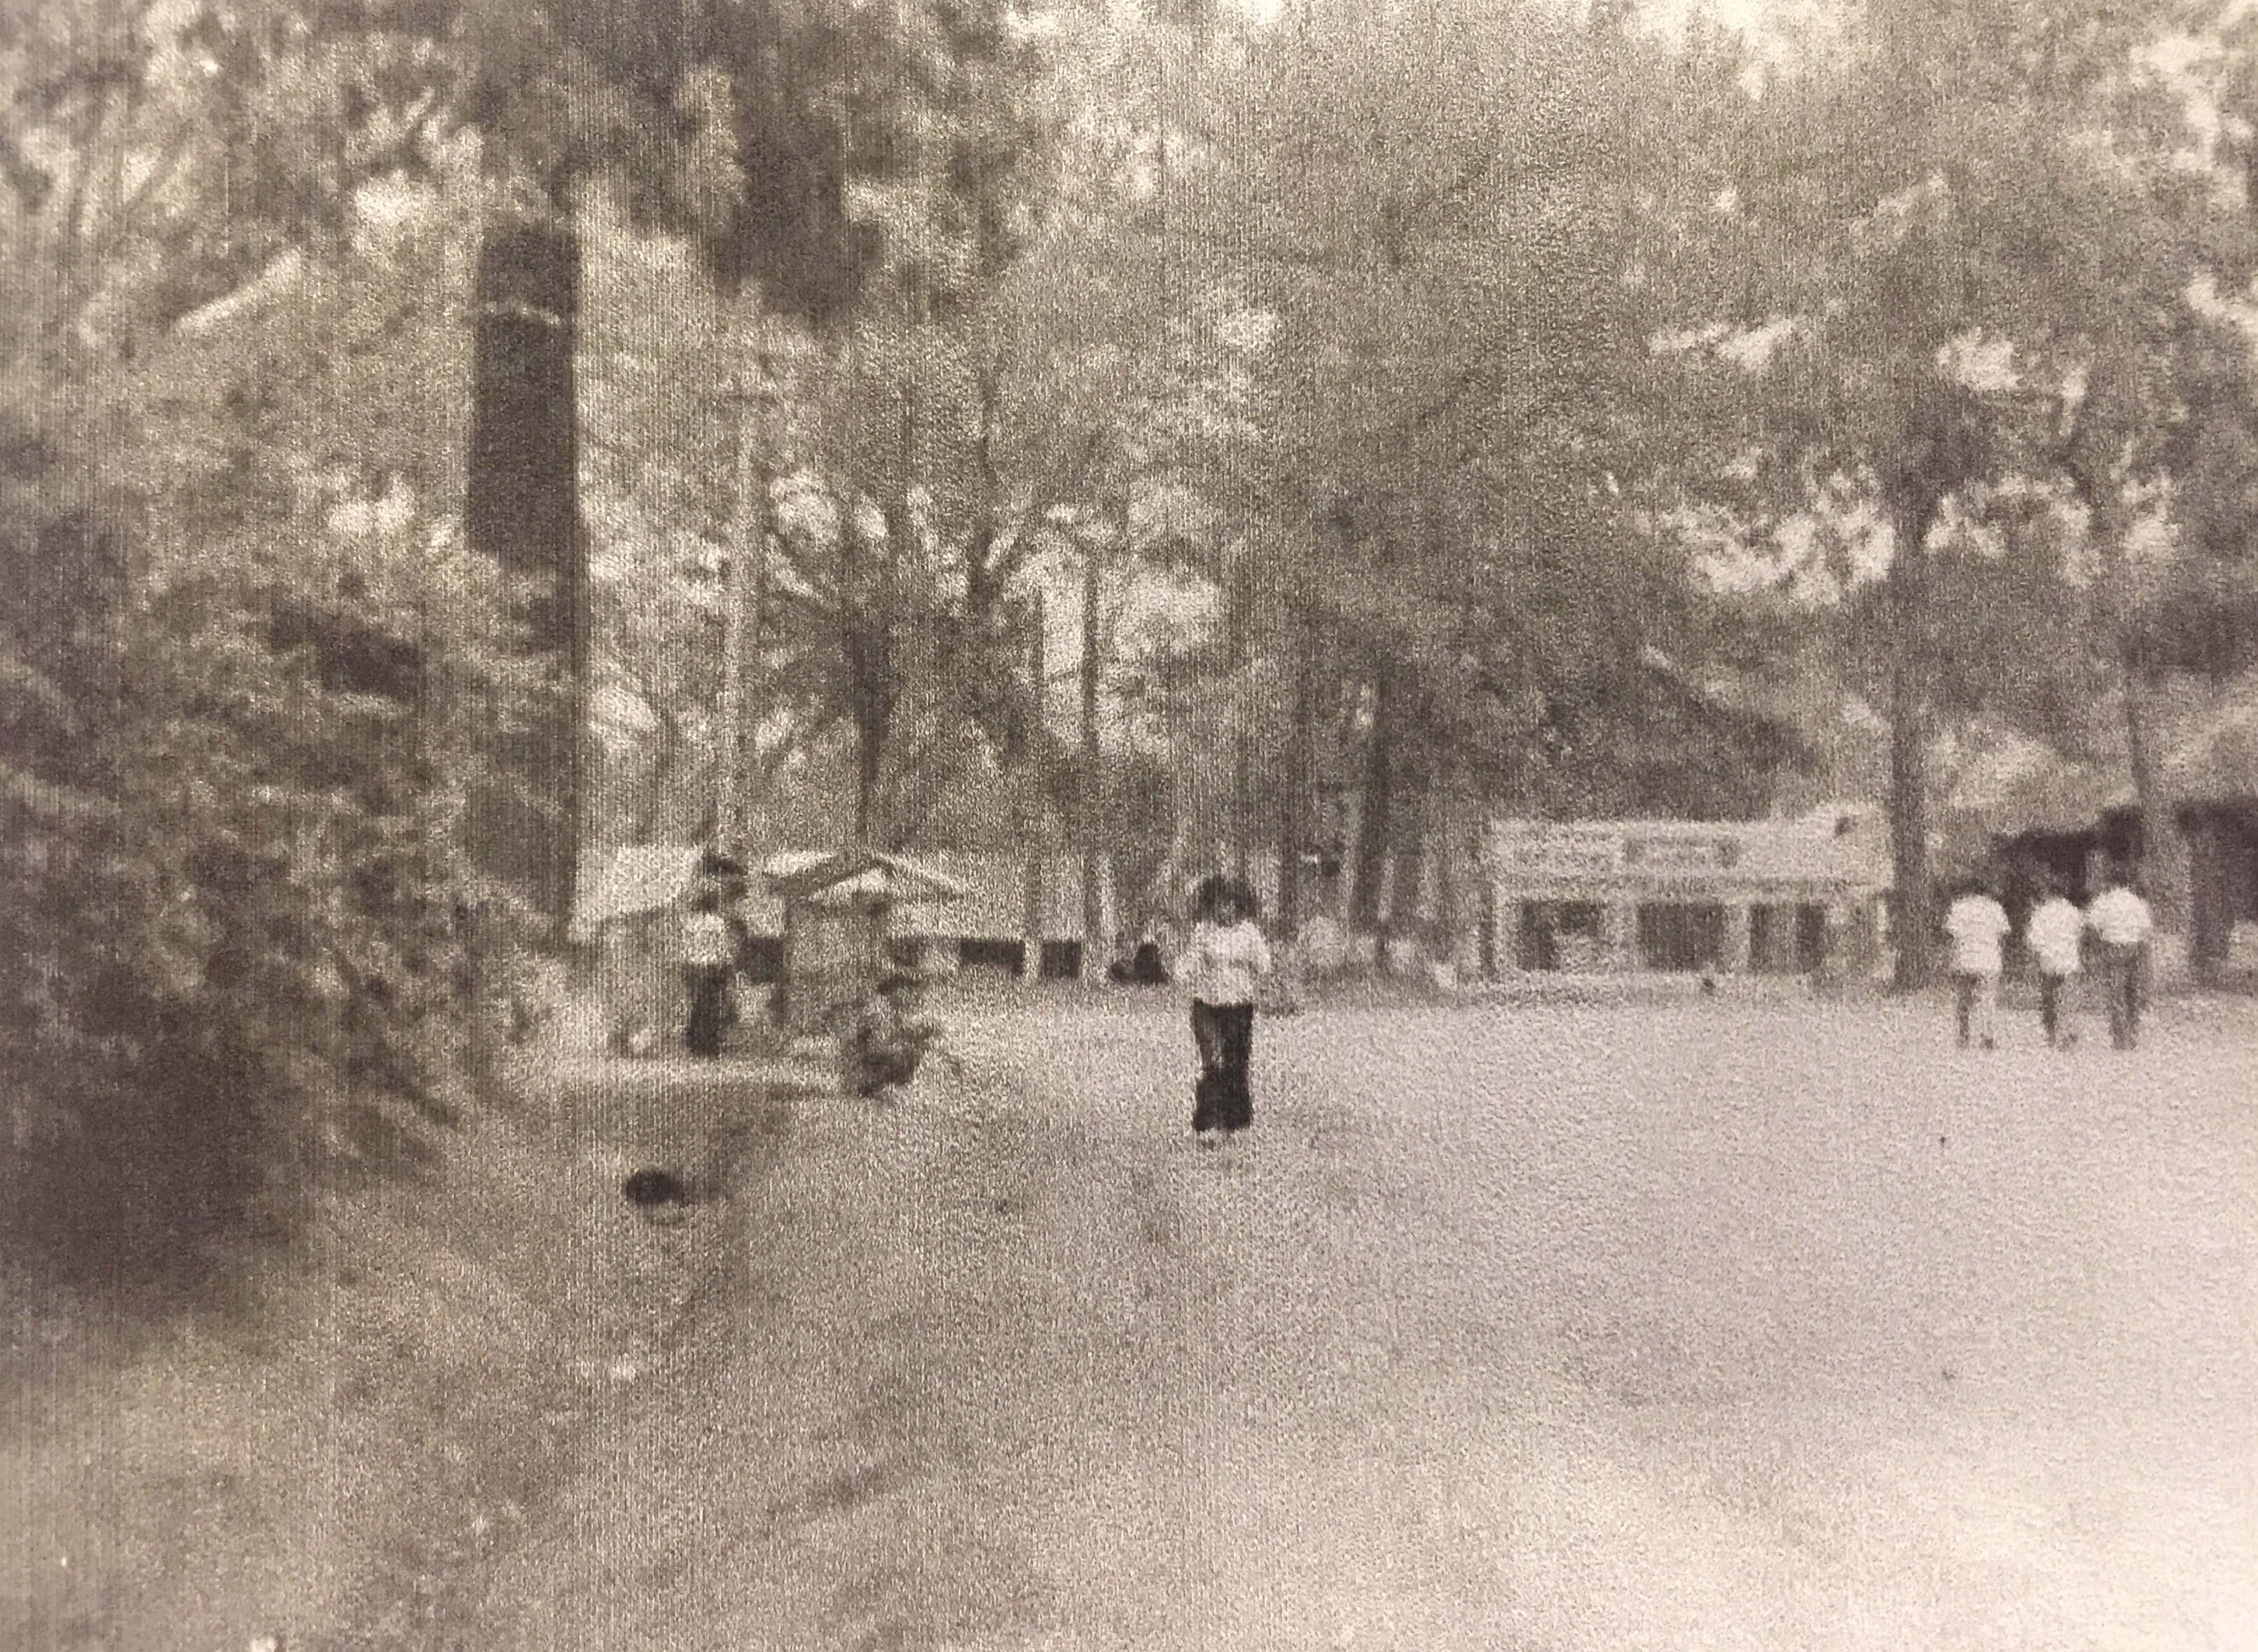 A street with tall trees on all sides, some people in the street, and a ditch off along the side of the road.